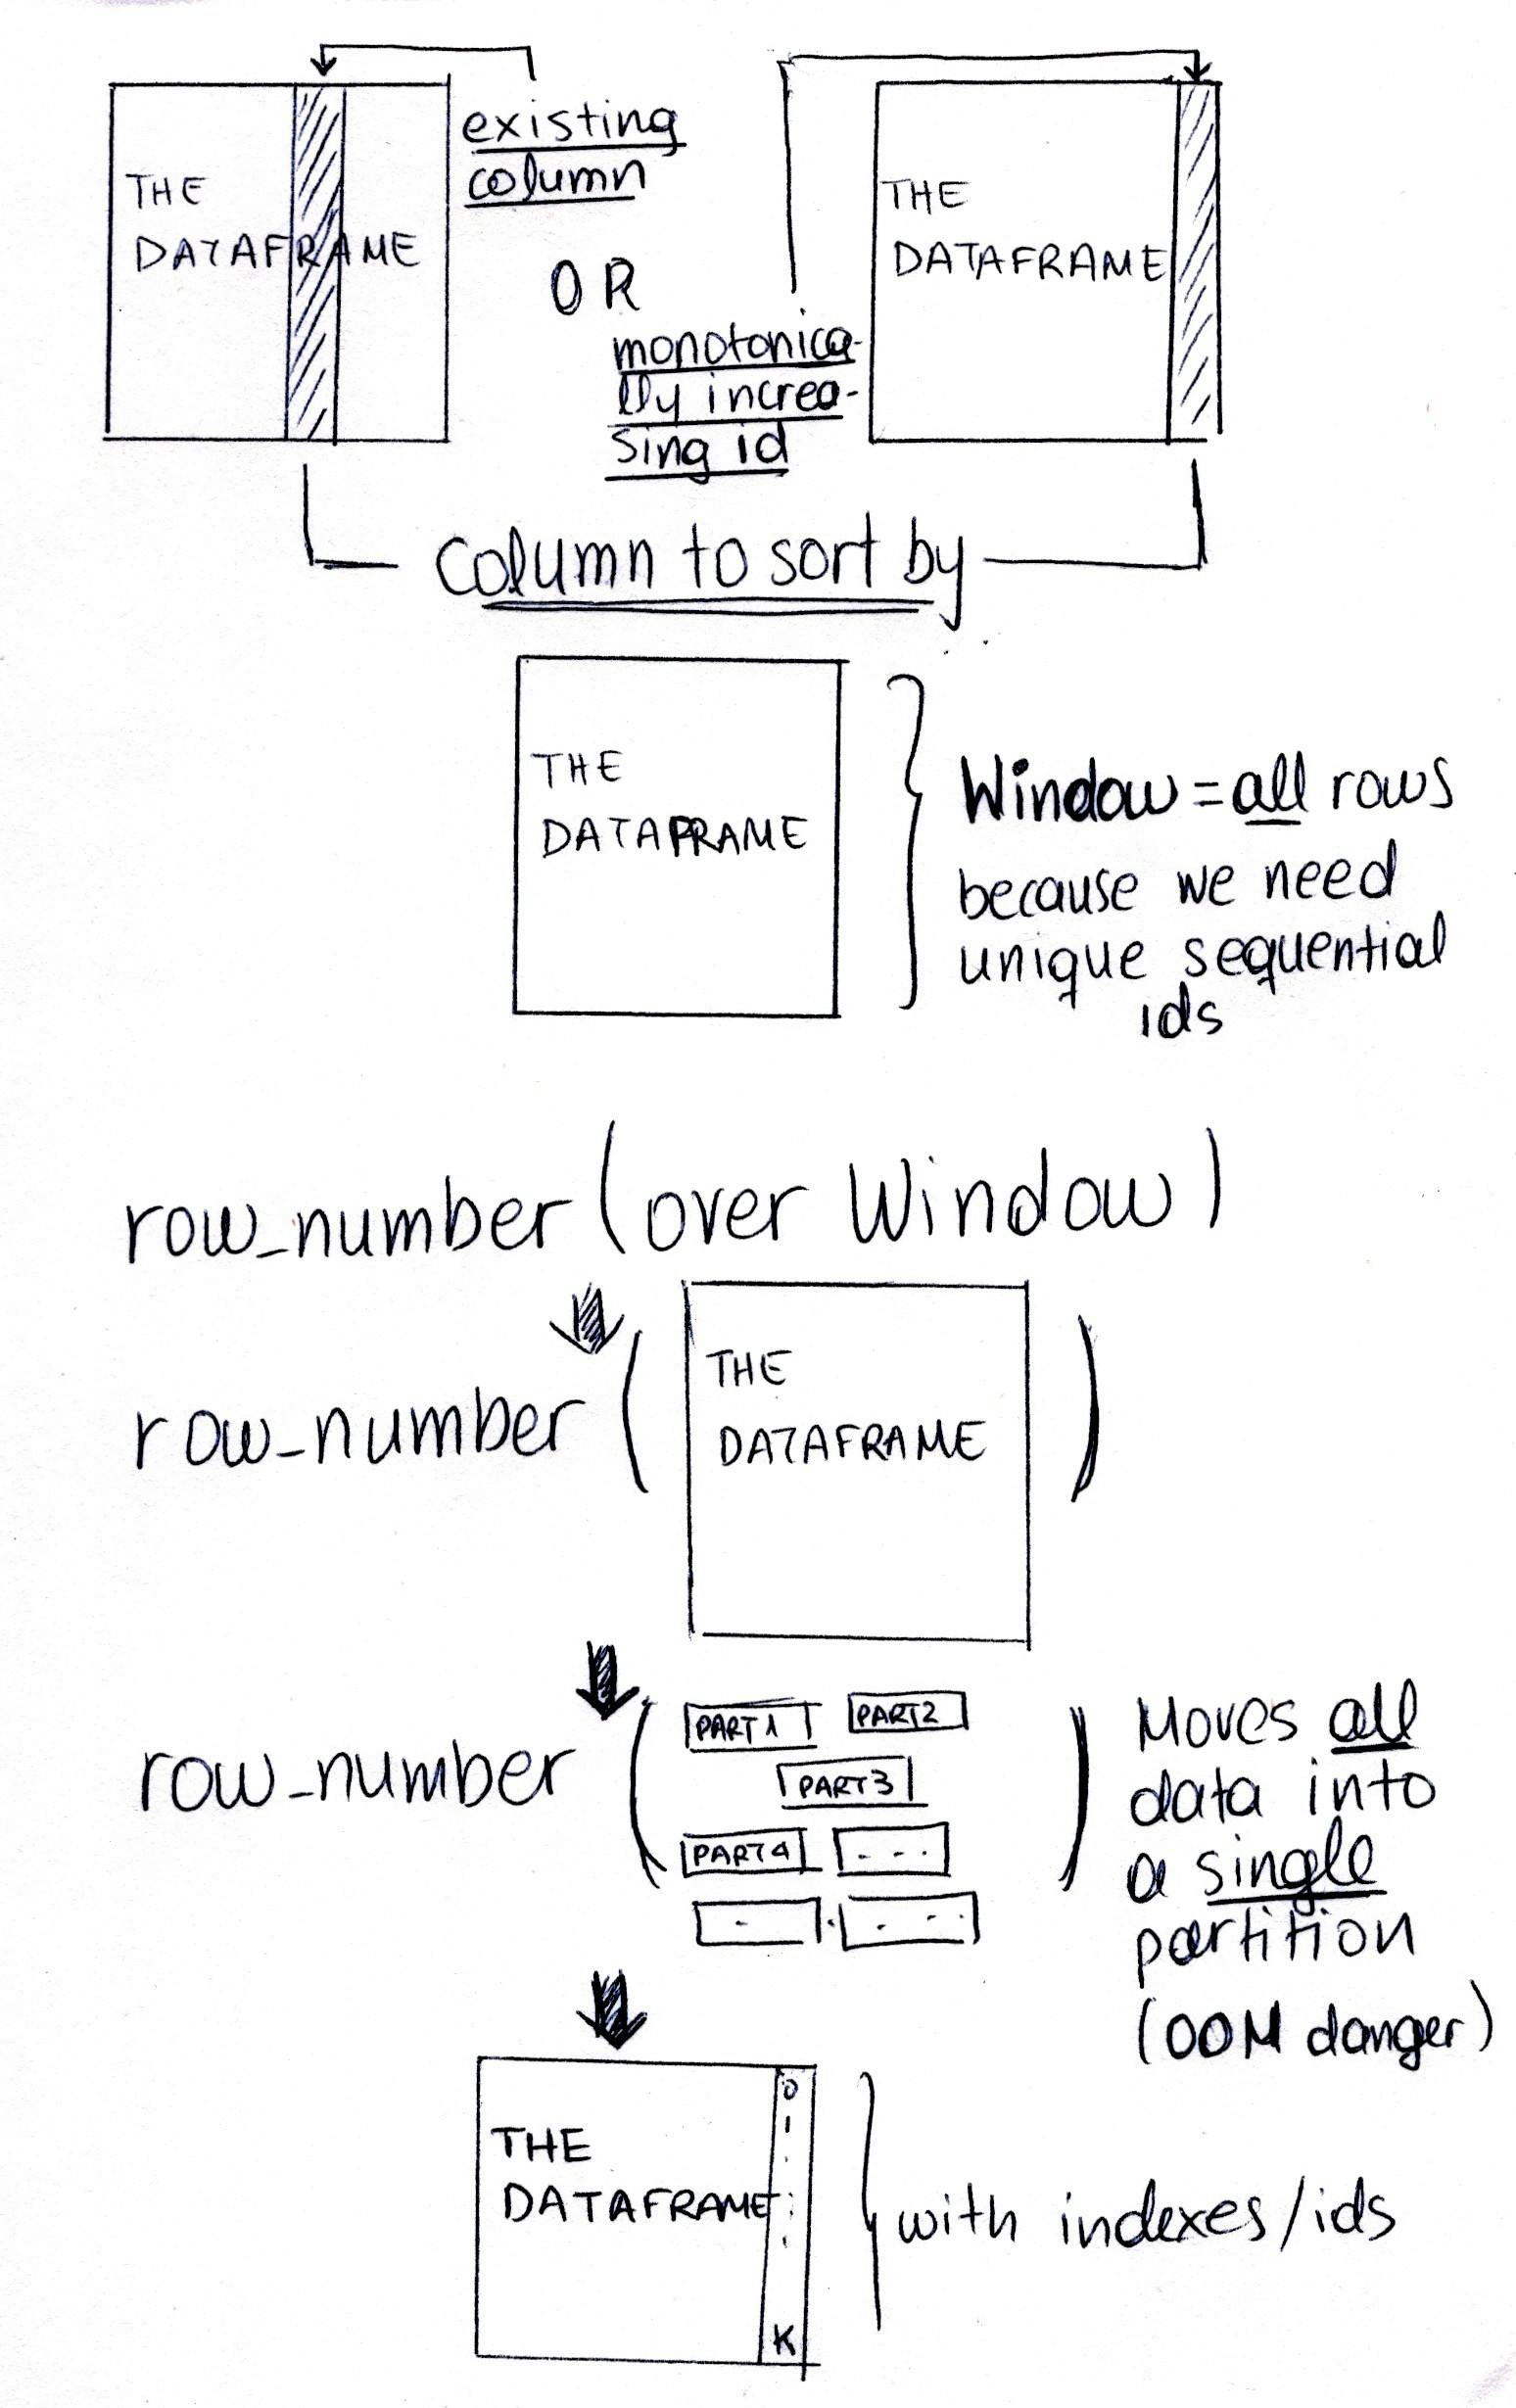 Using row_number() over Window and the OOM danger